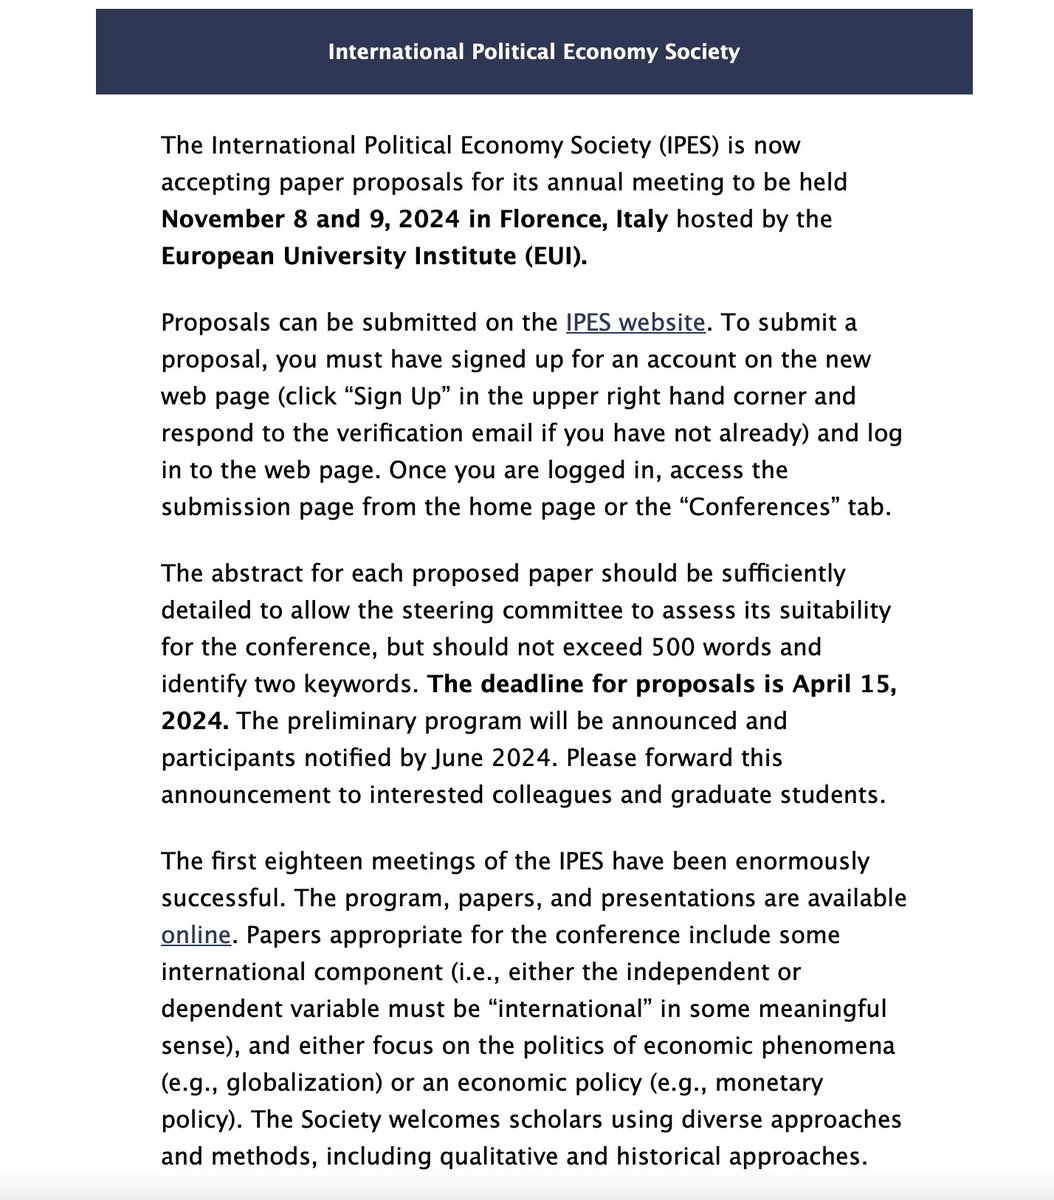 Do you do political economy research related to any international issues? Then consider submitting a paper for the IPES 2024 conference – my favorite conference is being held in Florence (at the EUI) this year – for the first time in Europe. …ernationalpoliticaleconomysociety.org